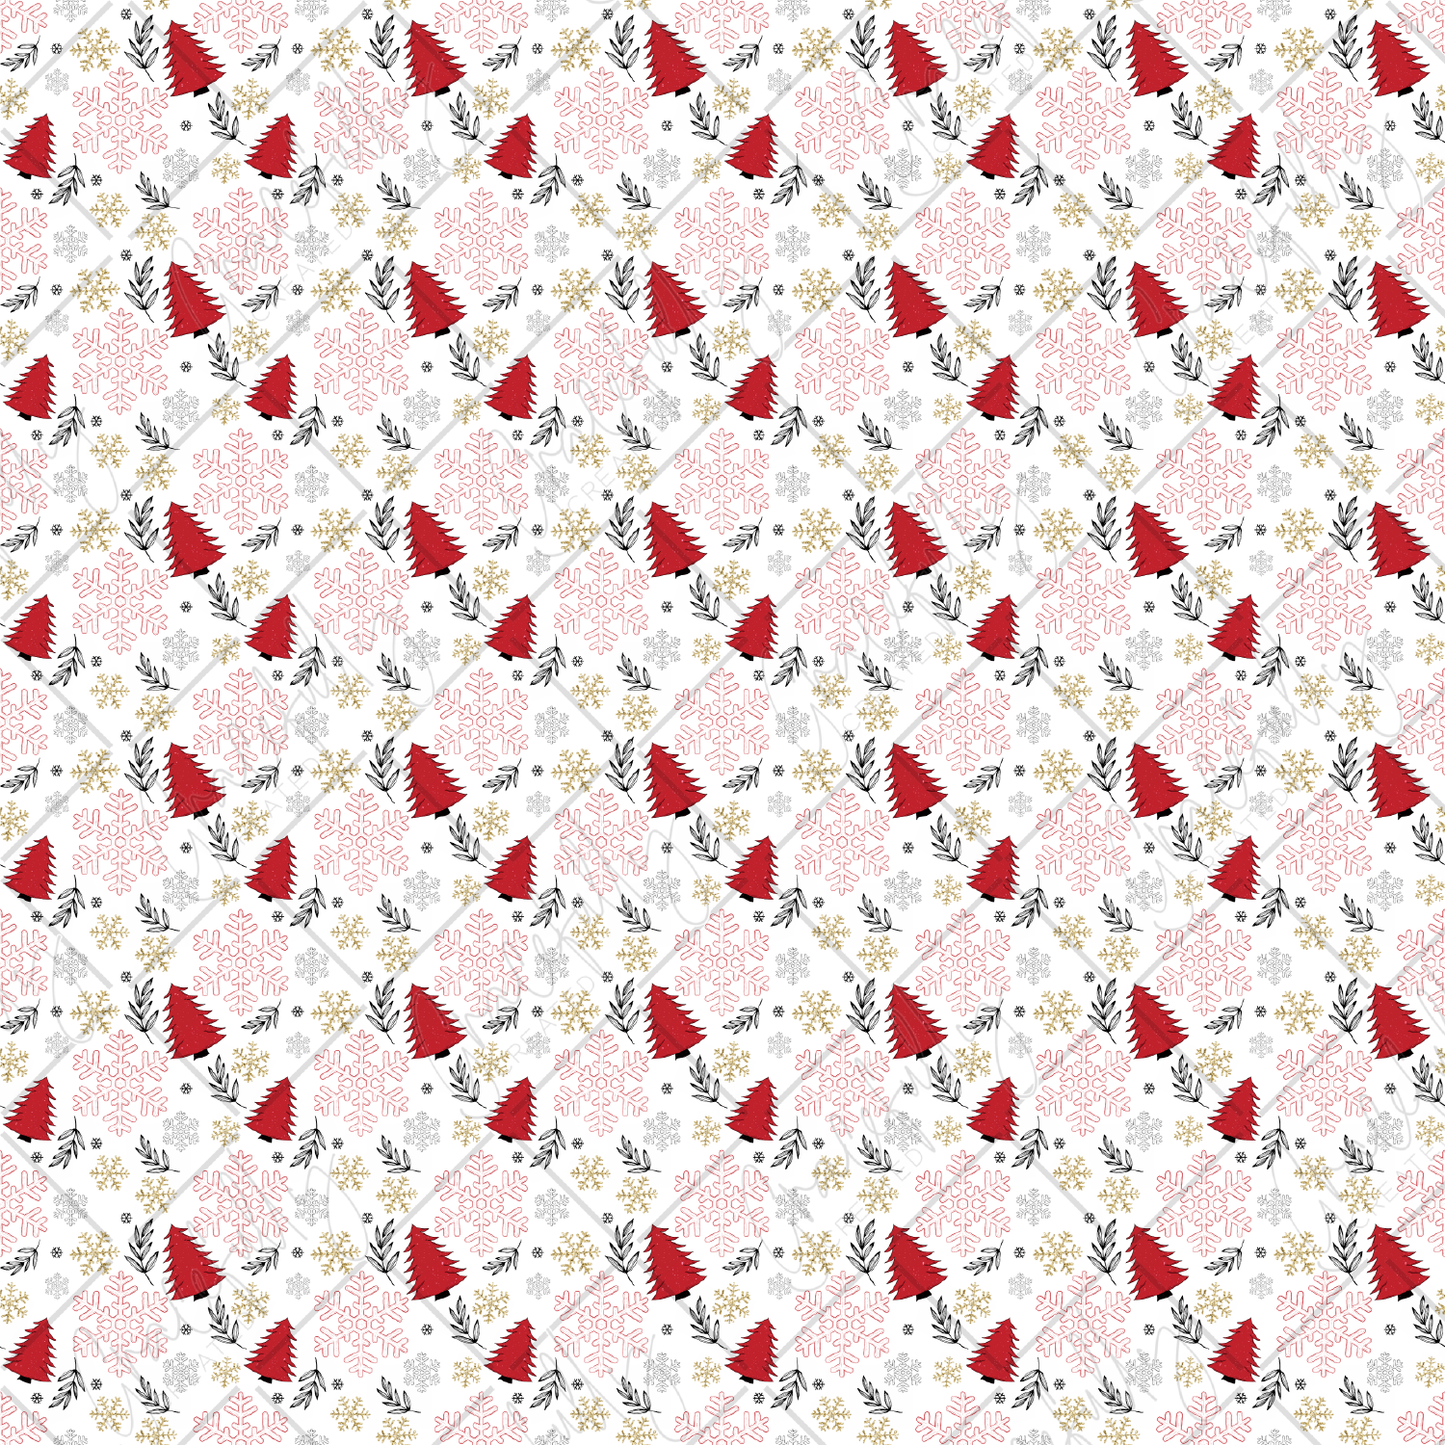 CPV65 Red Snowflakes